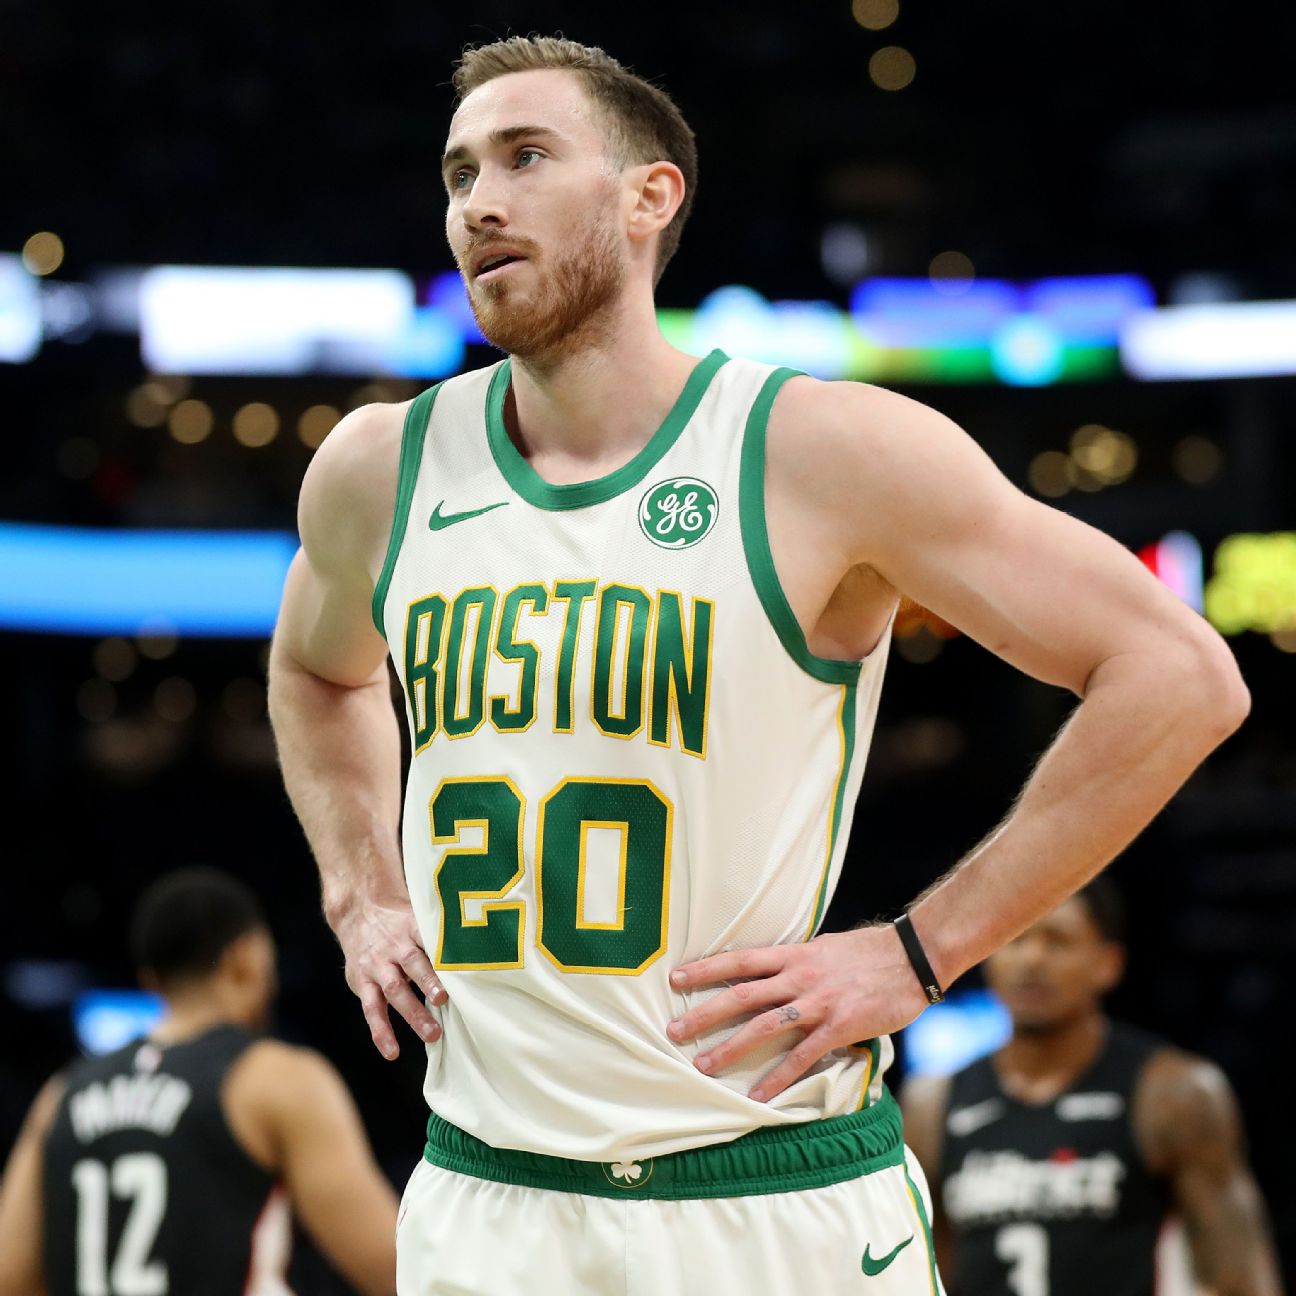 Gordon Hayward is injured again. This time it's a fractured hand